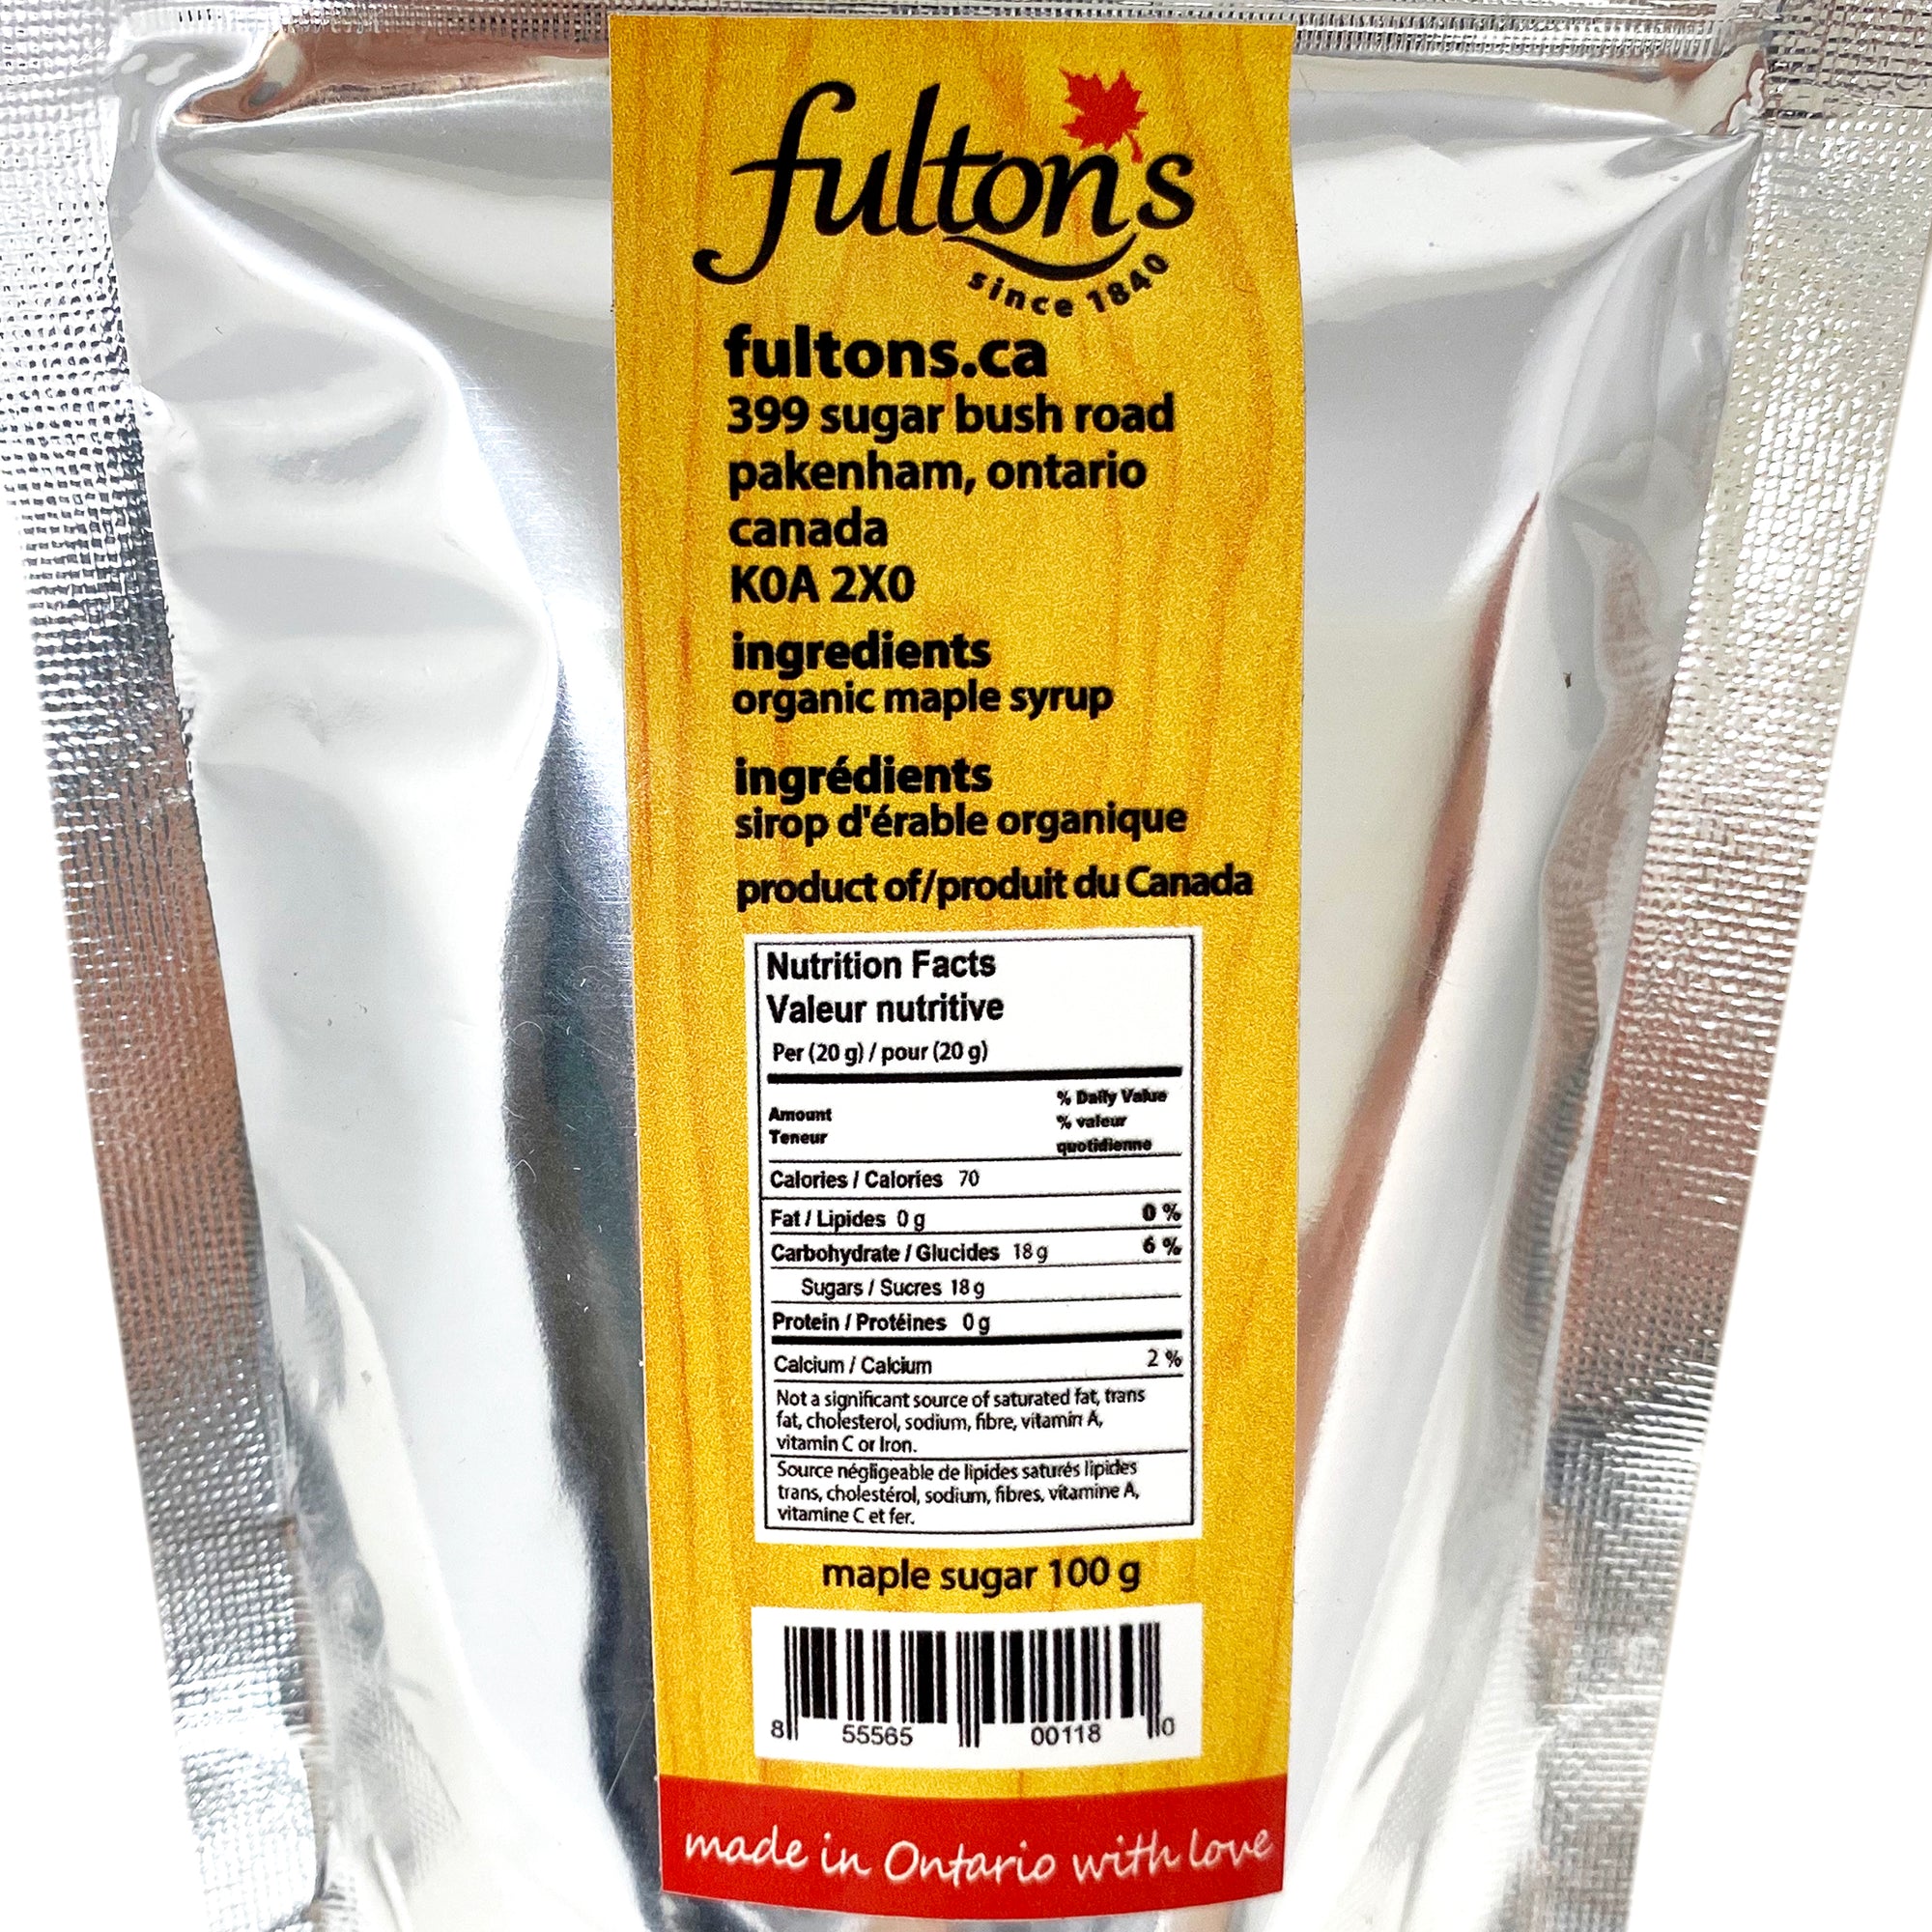 Reverse view of Fulton's maple sugar, ingredients and nutrition label.